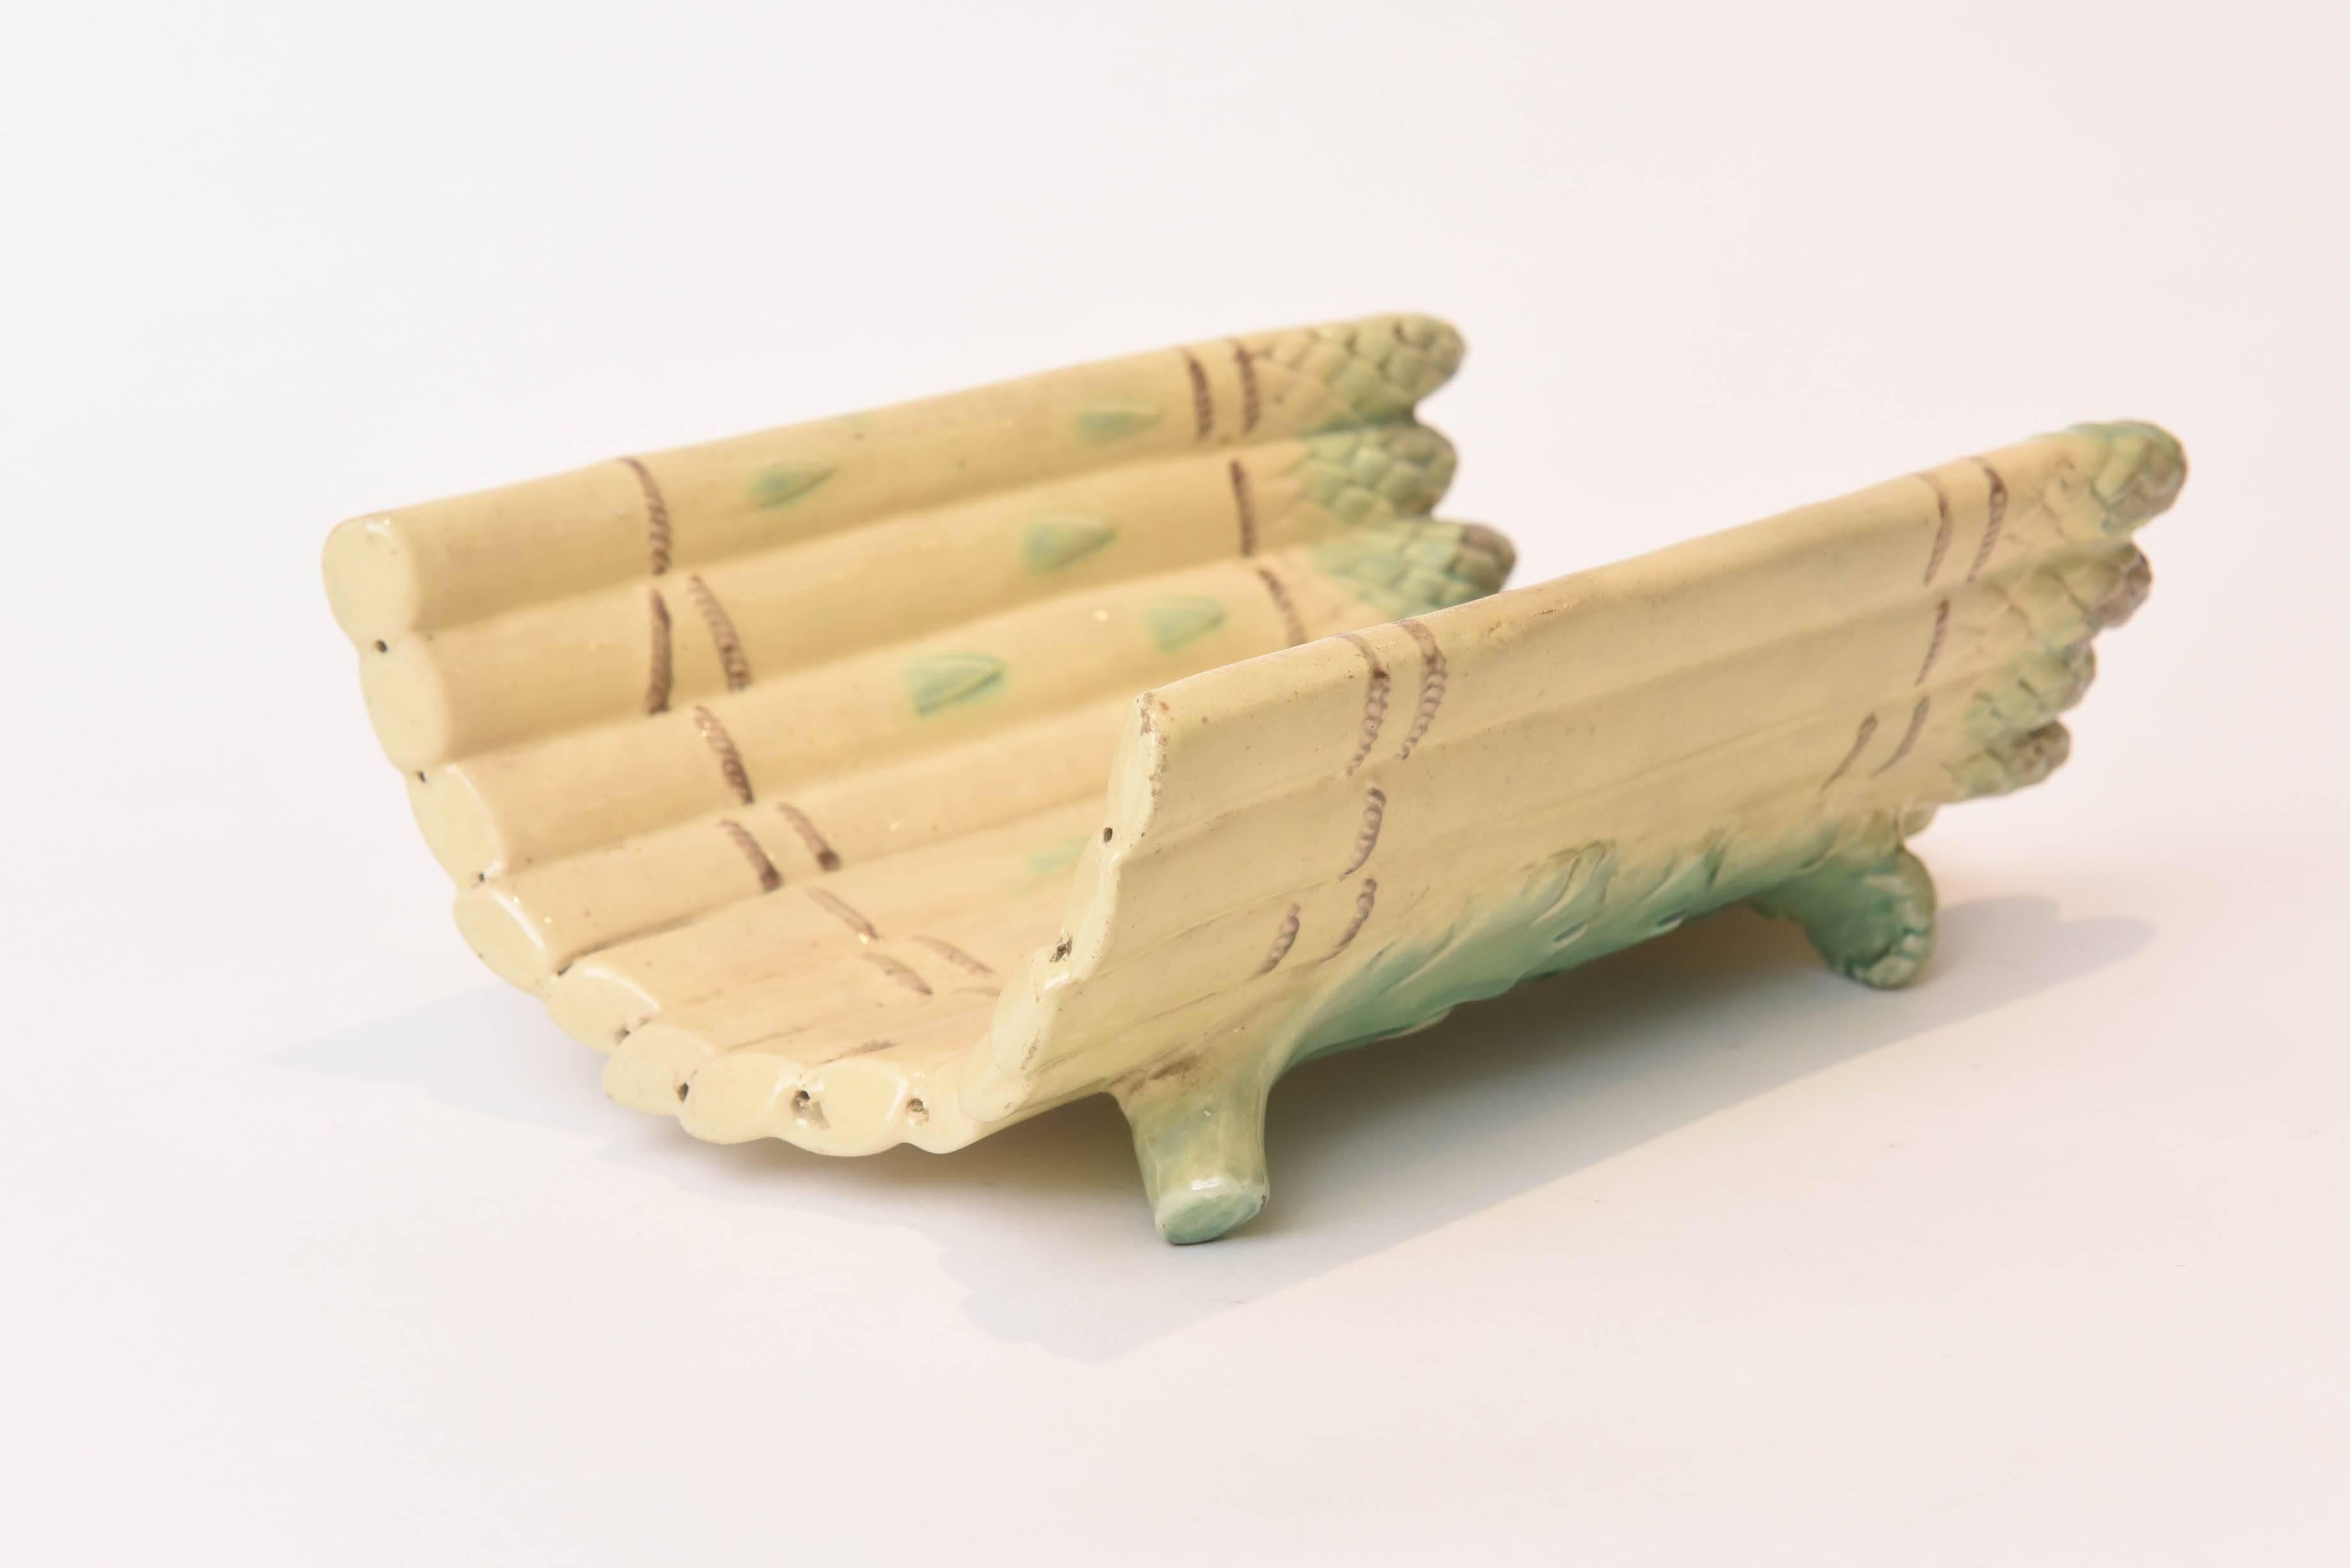 Late 19th Century Antique Majolica Asparagus Cradle, Hand-Painted with Pedestal Feet